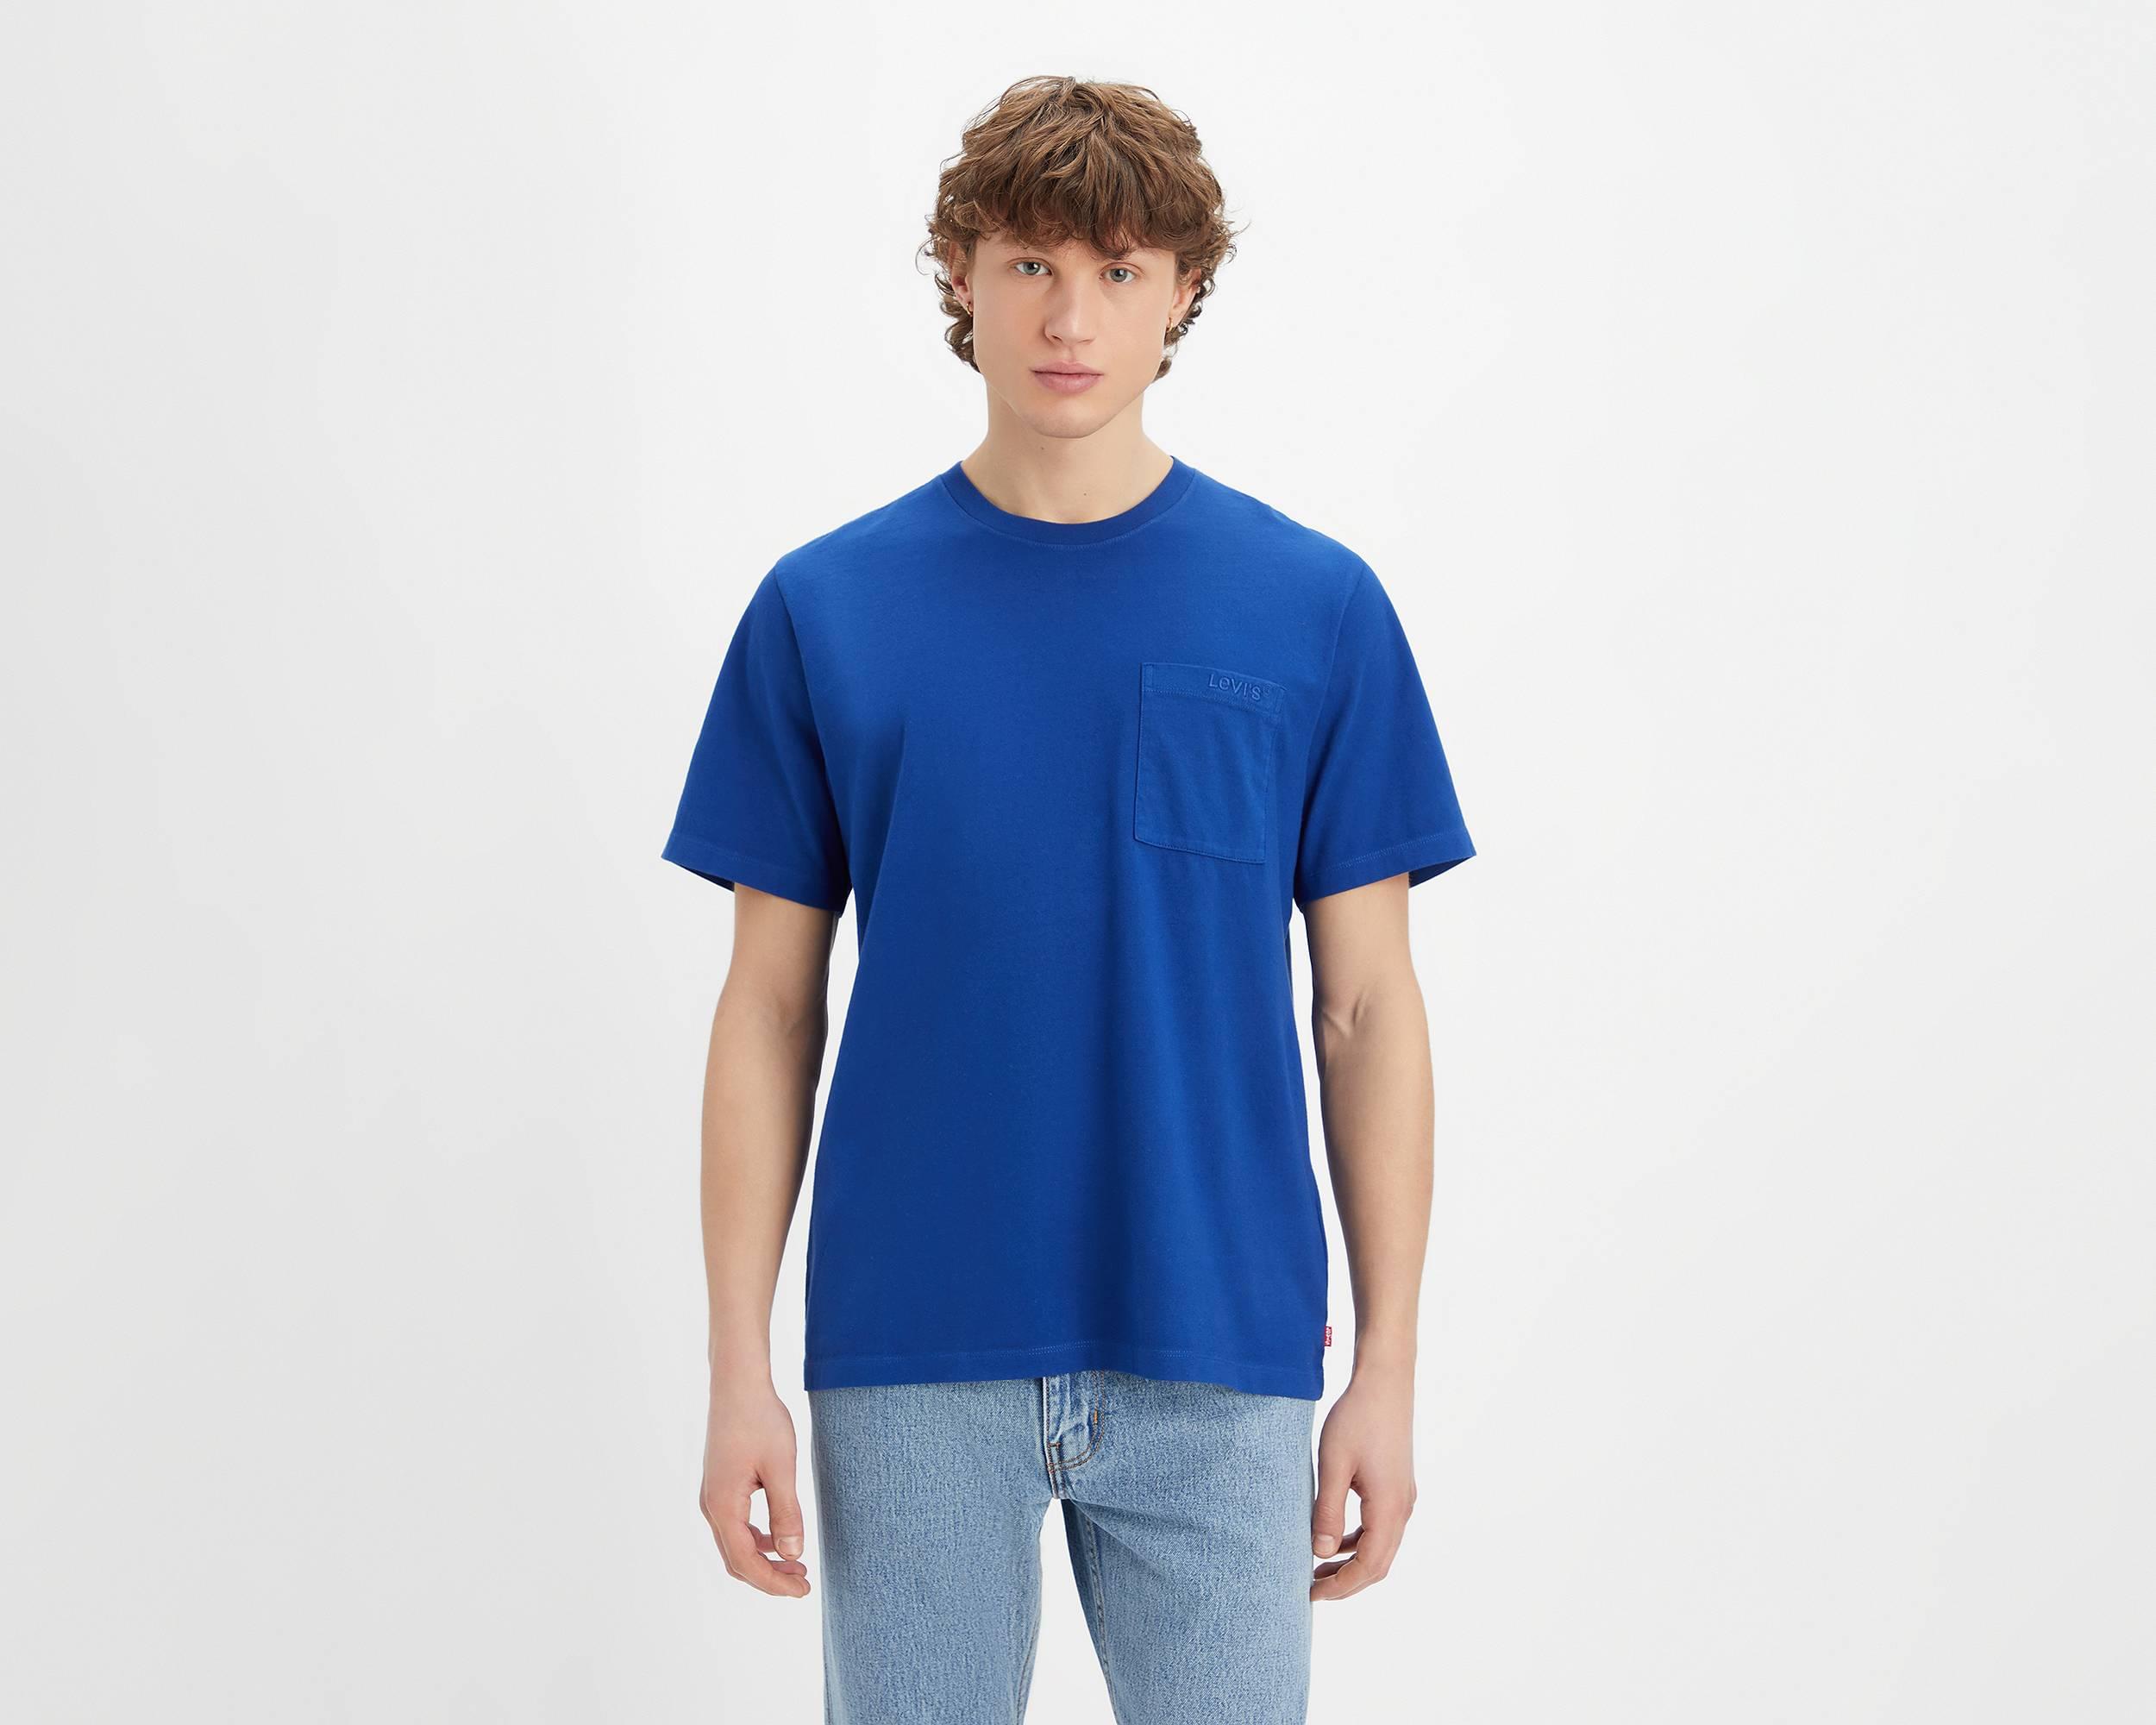 Relaxed Fit Pocket Tee - Levi's Jeans, Jackets & Clothing